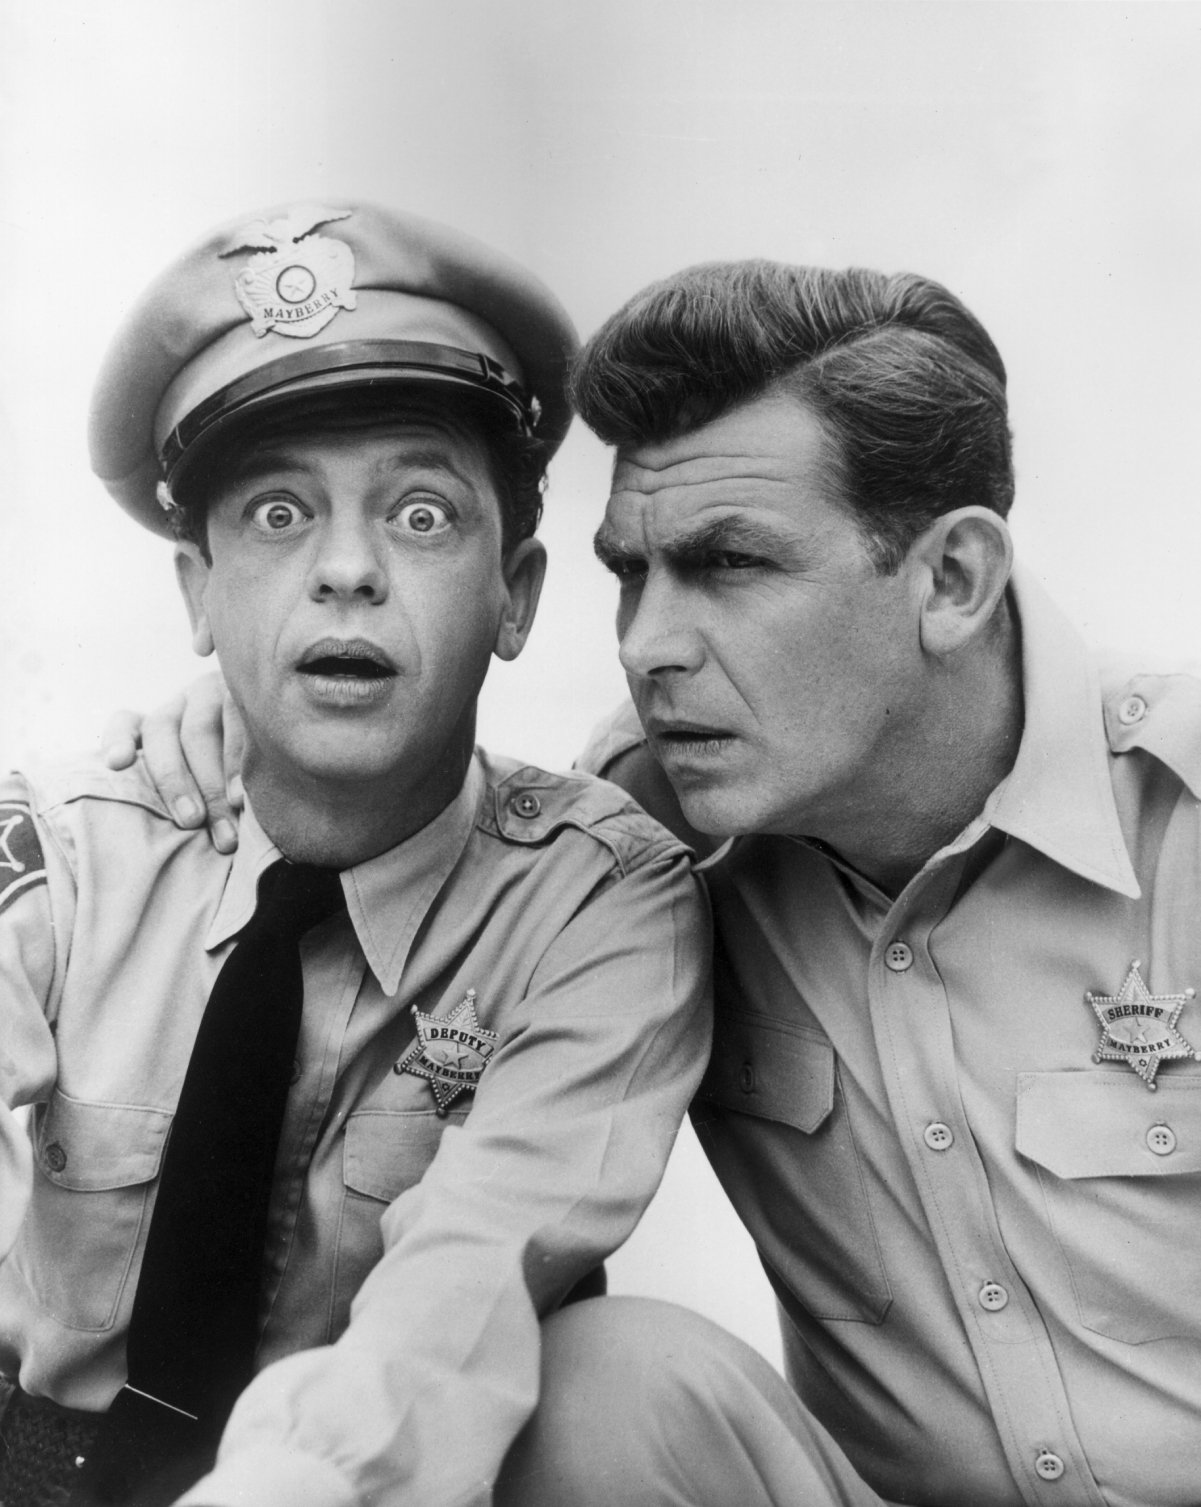 Don Knotts as Barney Fife and Andy Griffith as Sheriff Andy Taylor